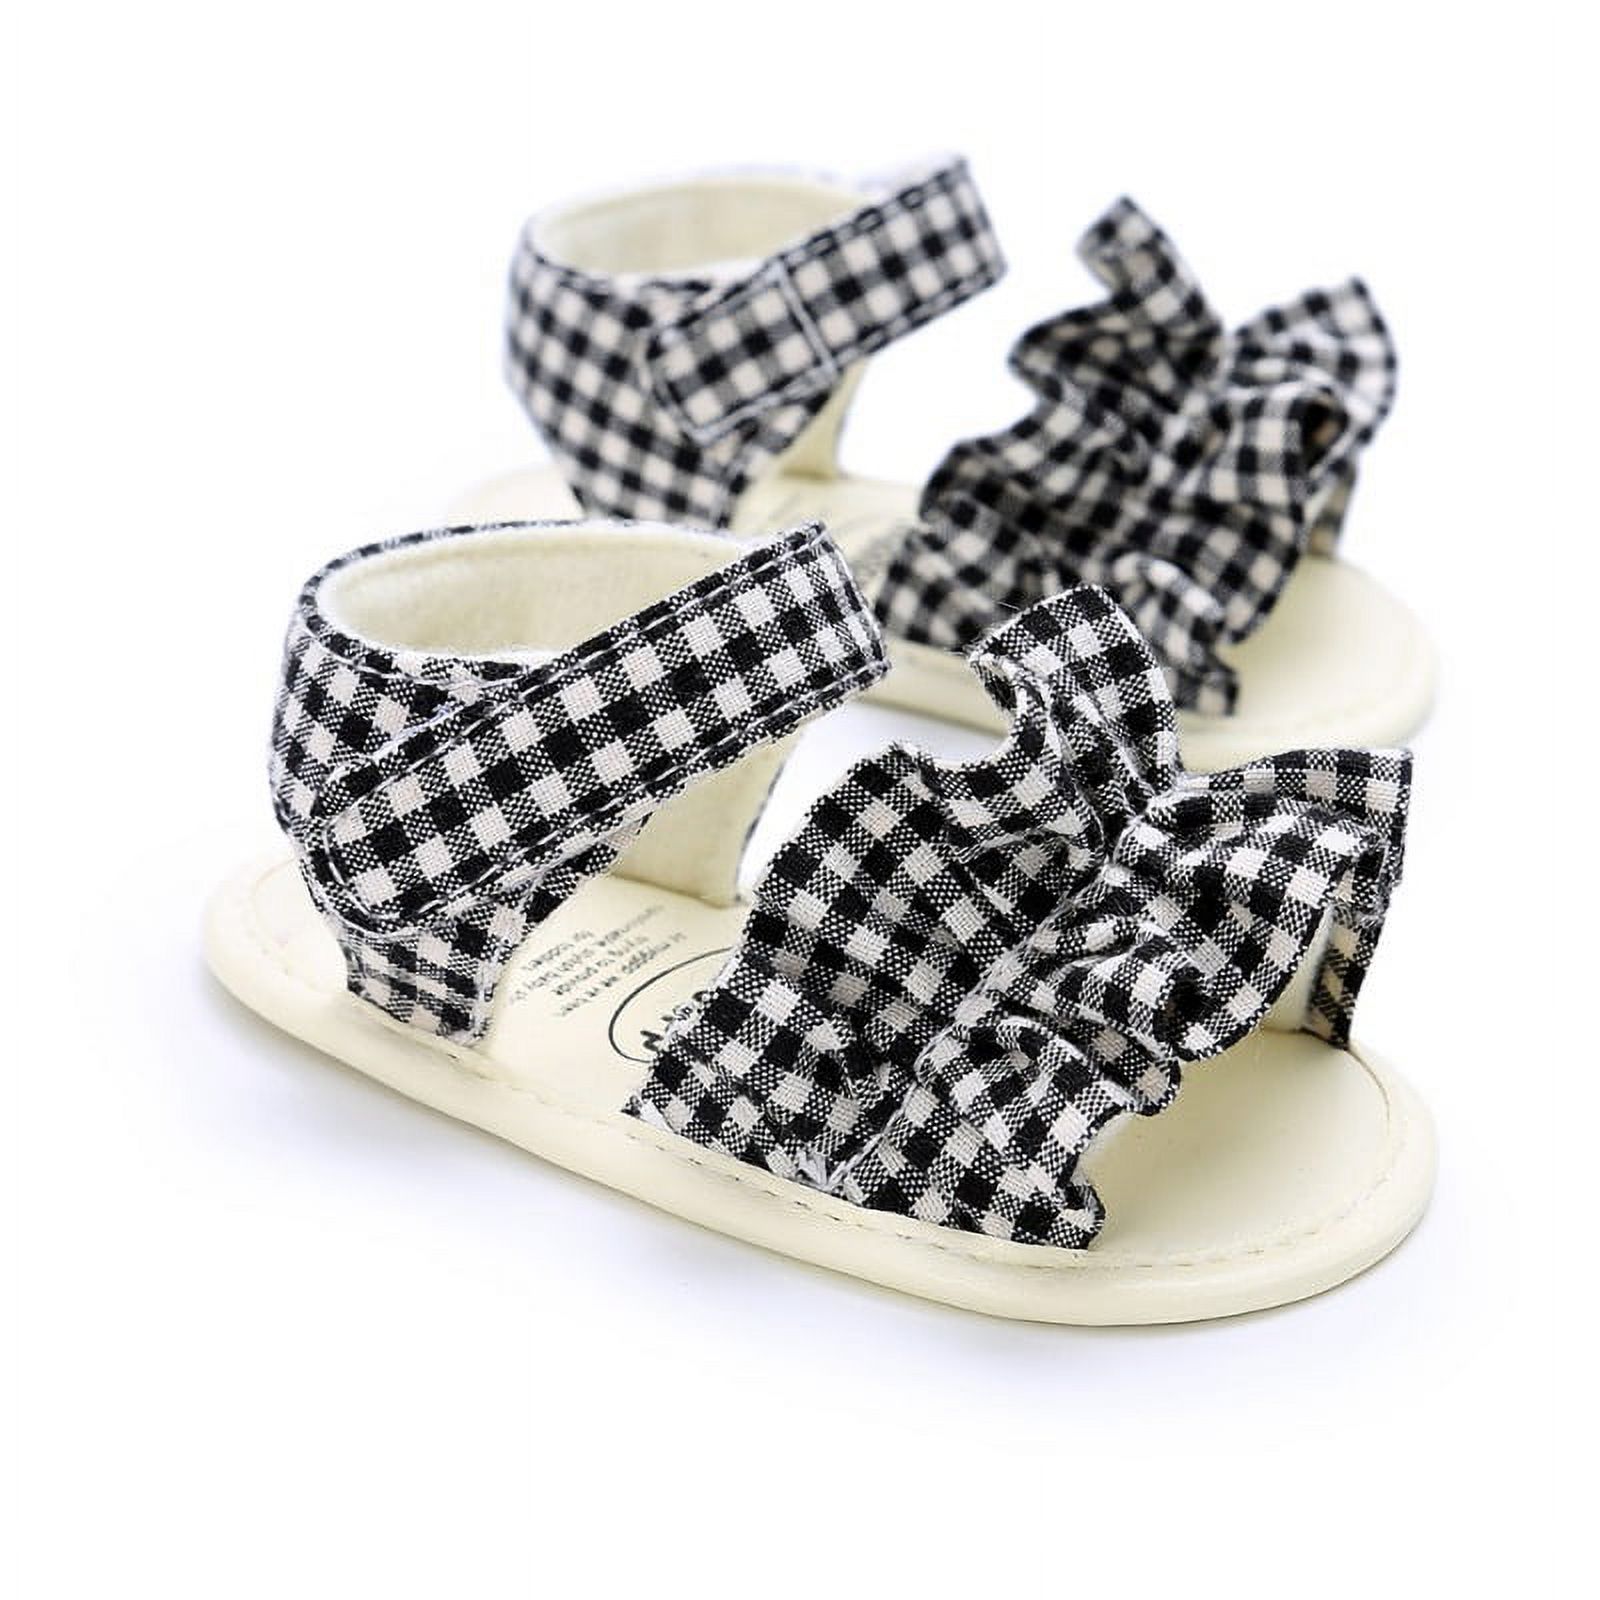 Infant Baby Boys Girls Sandals Summer Baby Dress Shoes Soft Sole Newborn Crib Shoes First Walkers Prewalker Shoe - image 5 of 6